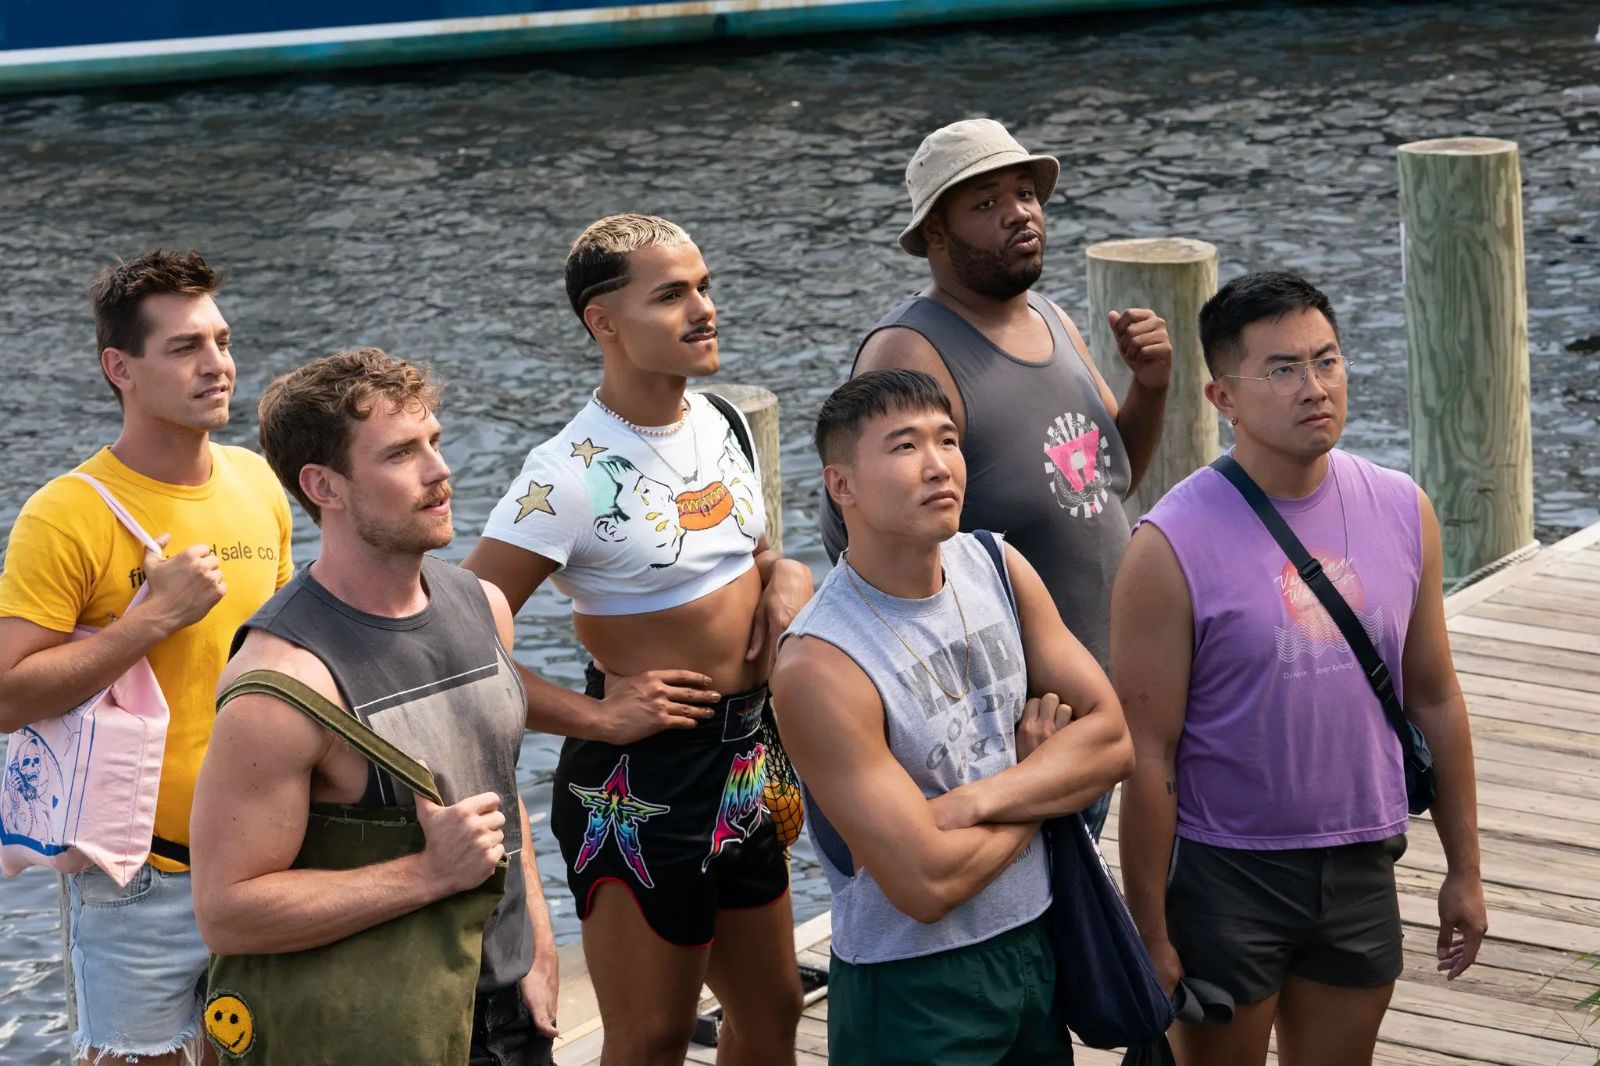 Fire Island Review Andrew Ahn’s Joyful Queer Retelling of Pride and